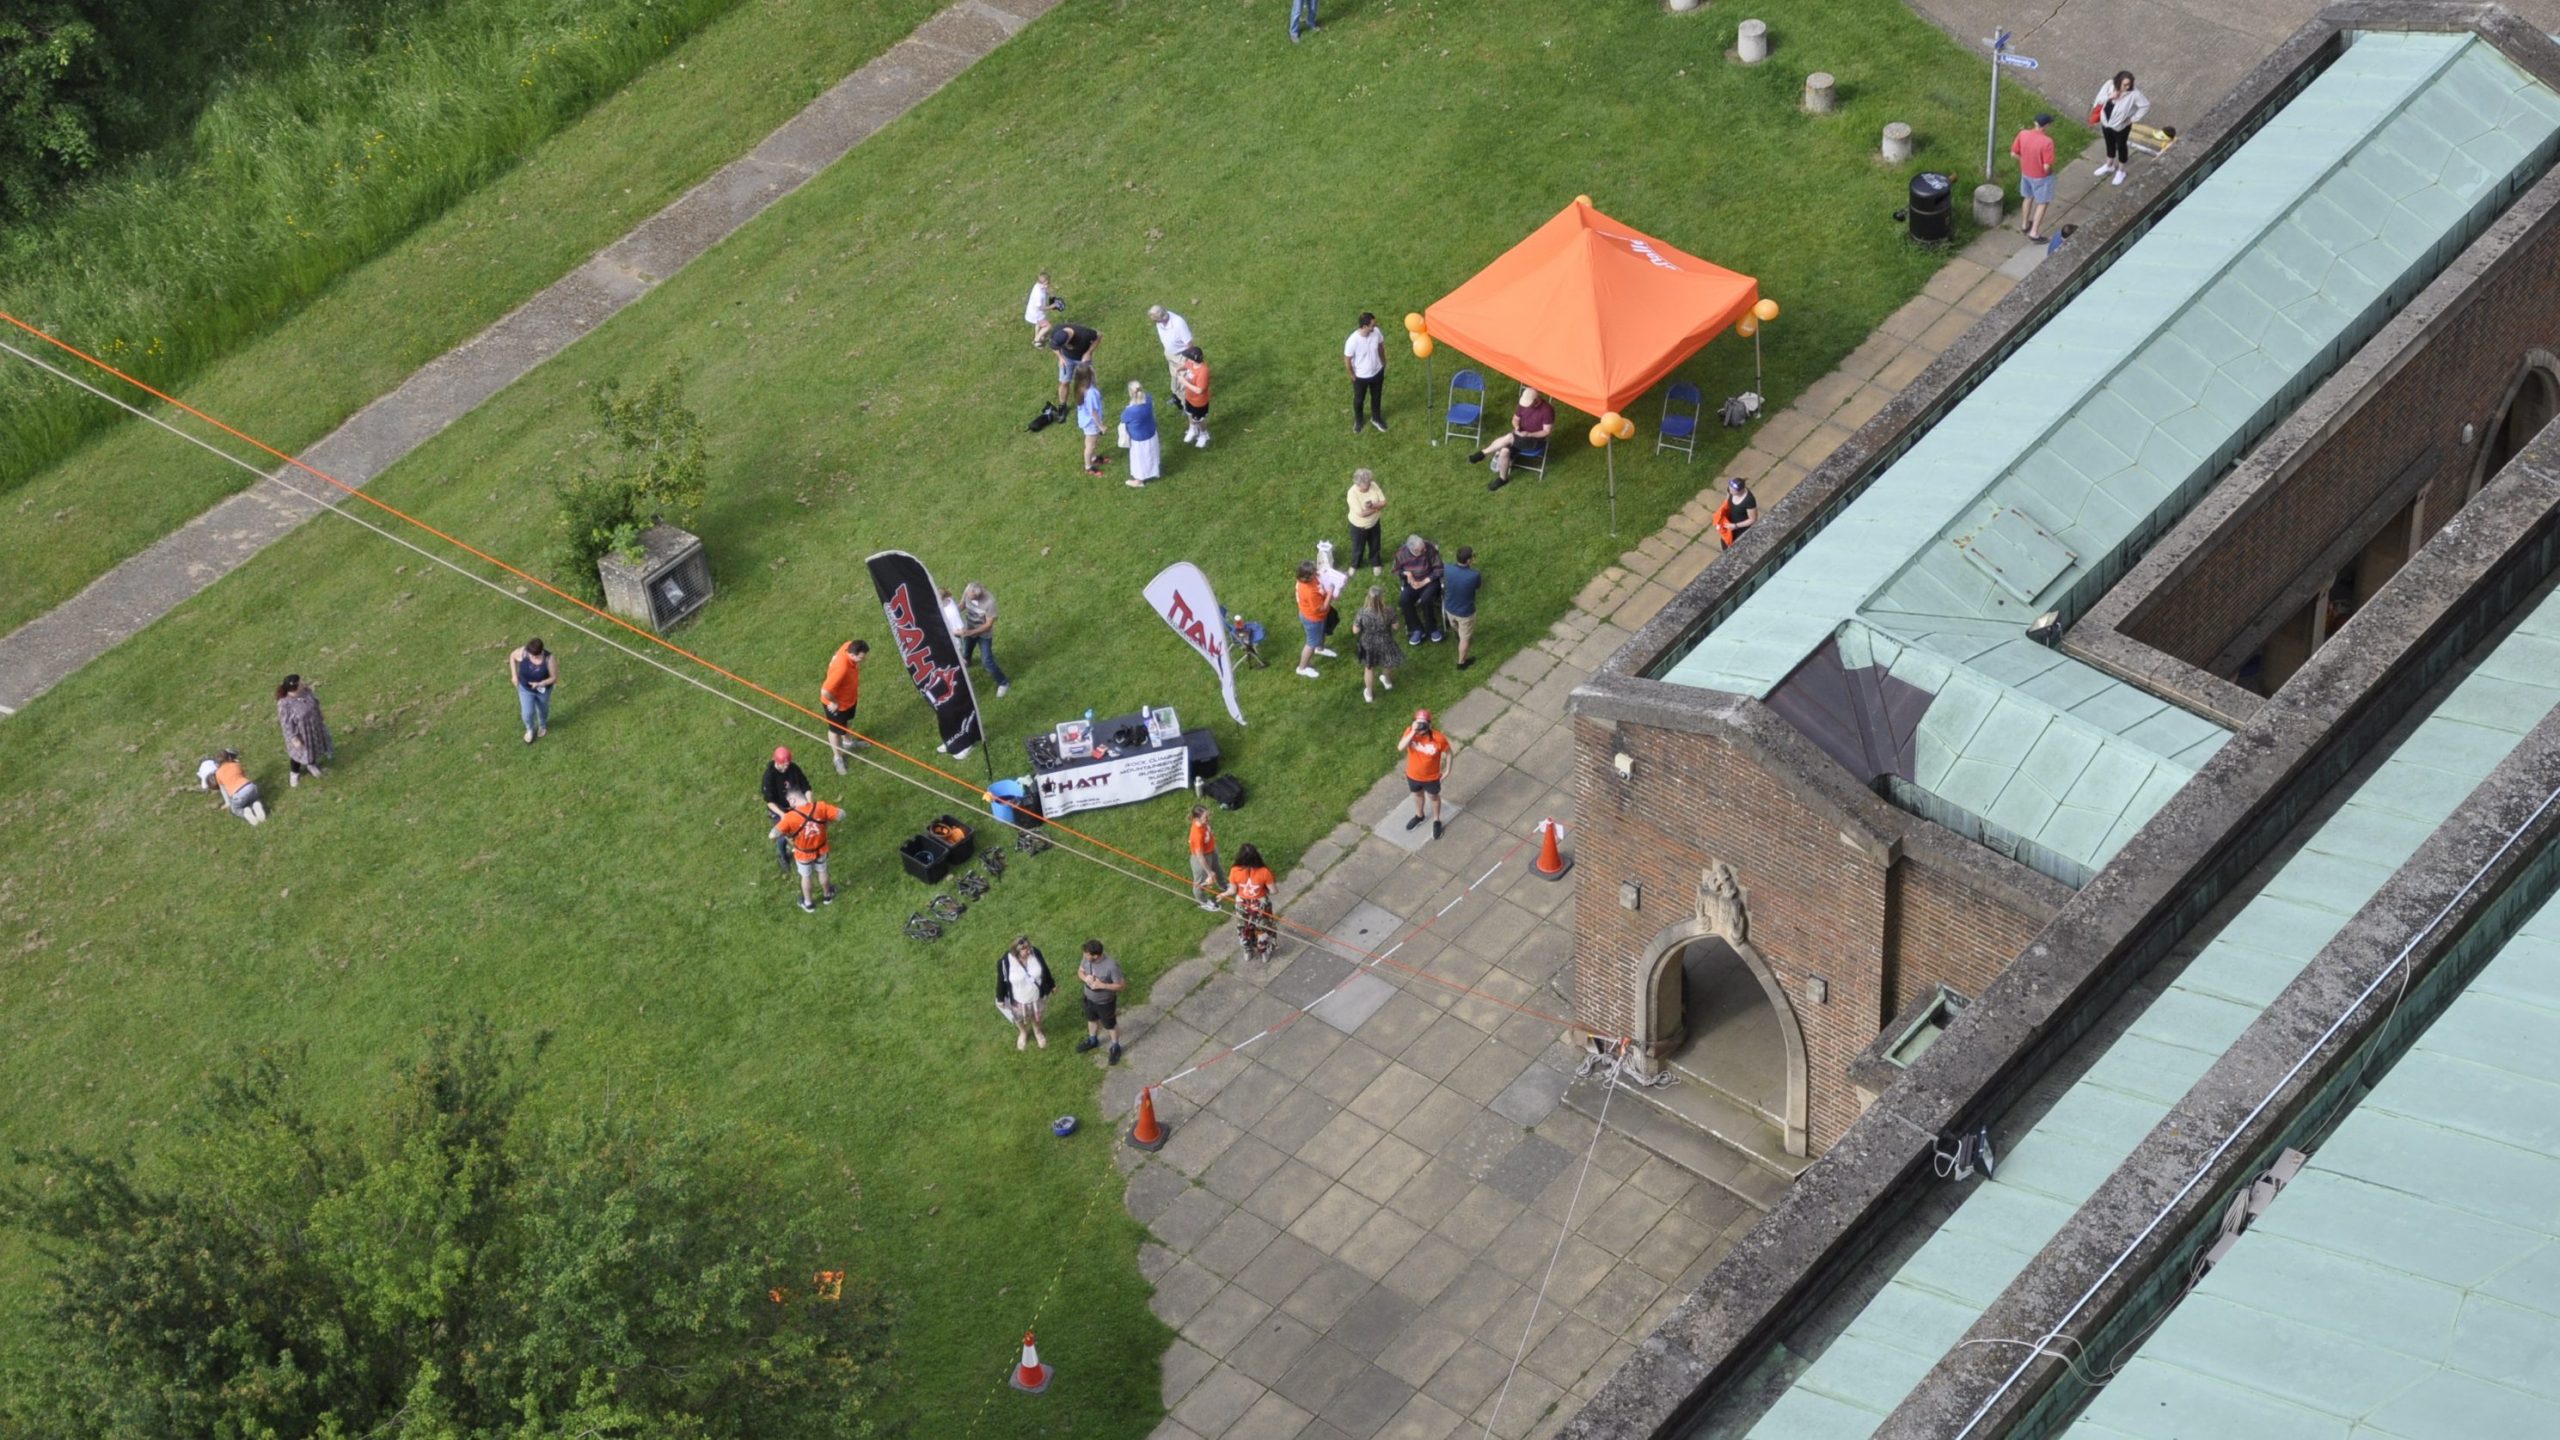 View from the top of an abseil, down to grassy ground. There is an orange gazebo, a sign up desk and a crowd of approximately 25 people gathered.